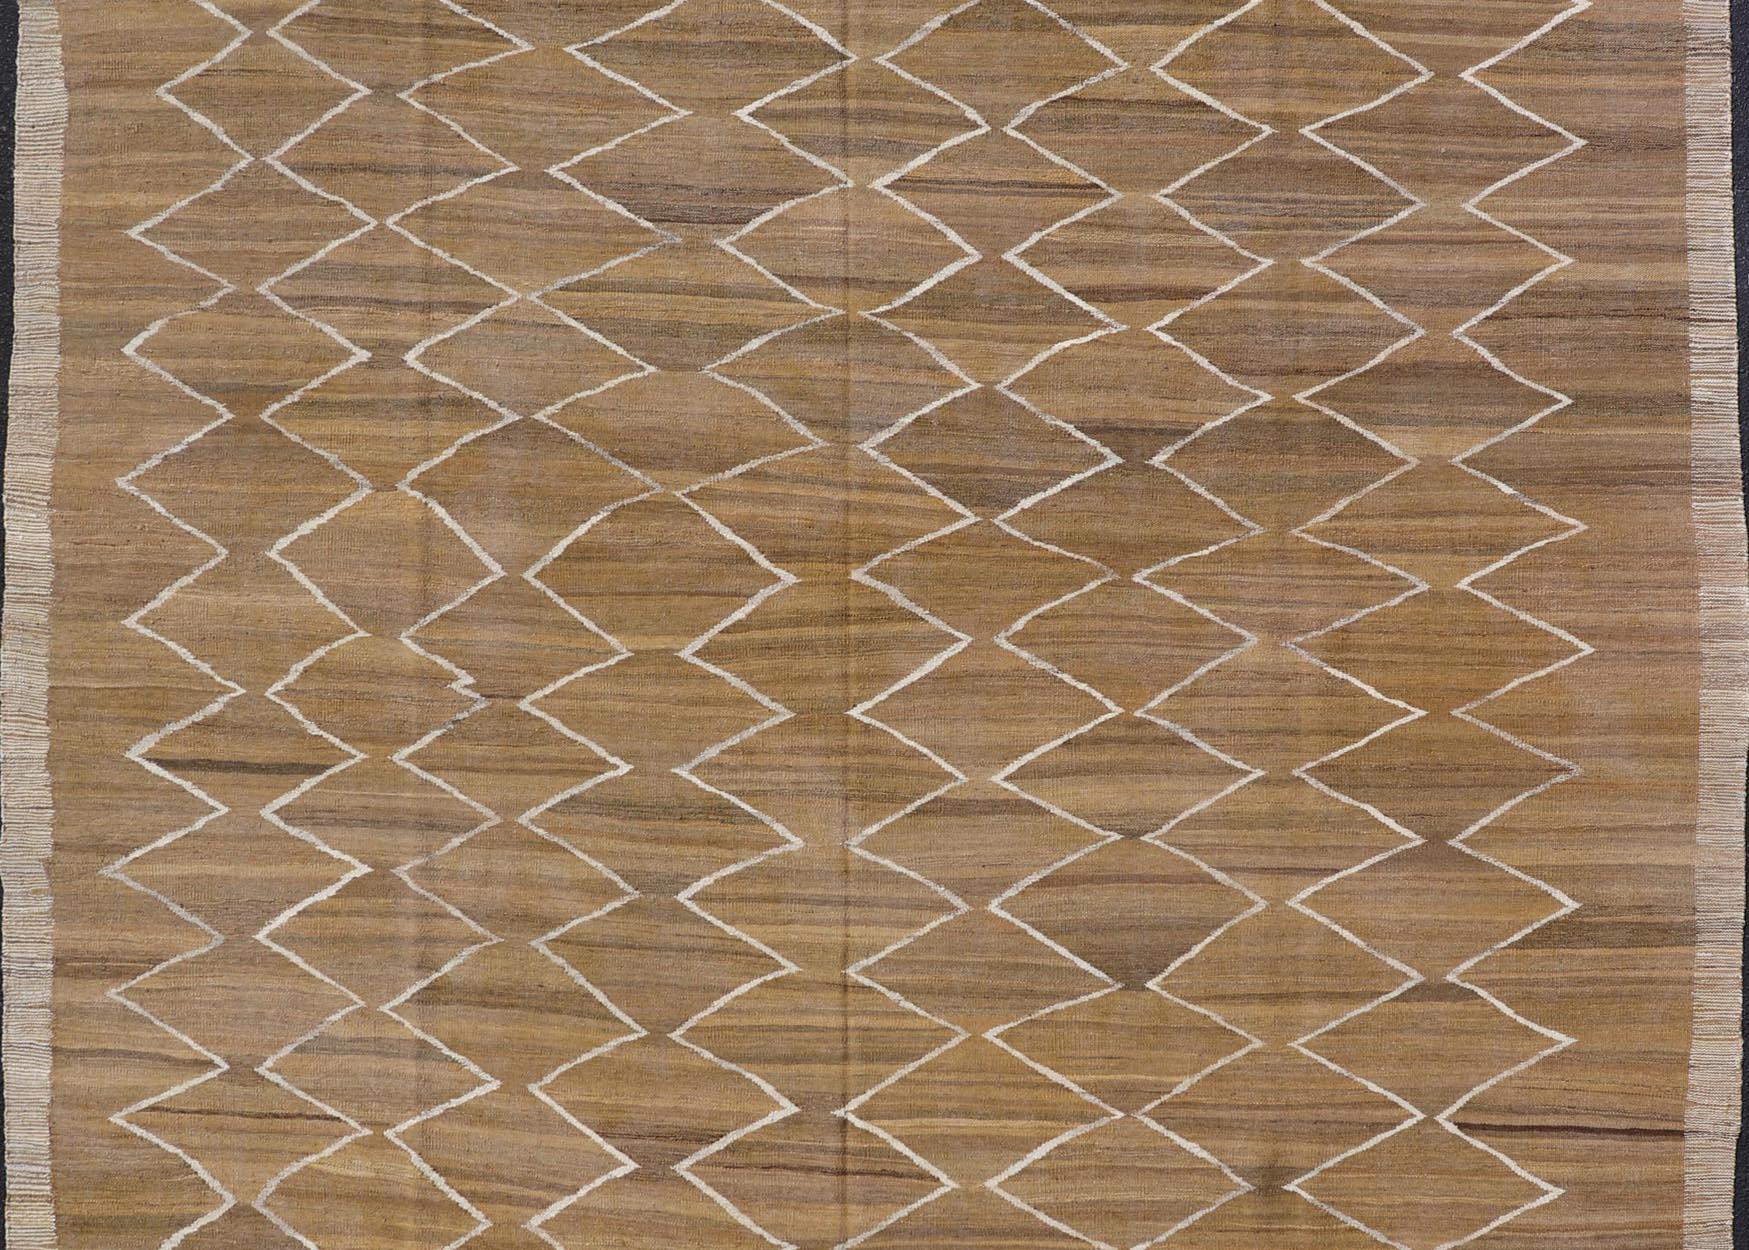 Hand-Woven Flatweave Kilim in Wool with Sub-Geometric Design in Marigold & Ivory In Excellent Condition For Sale In Atlanta, GA